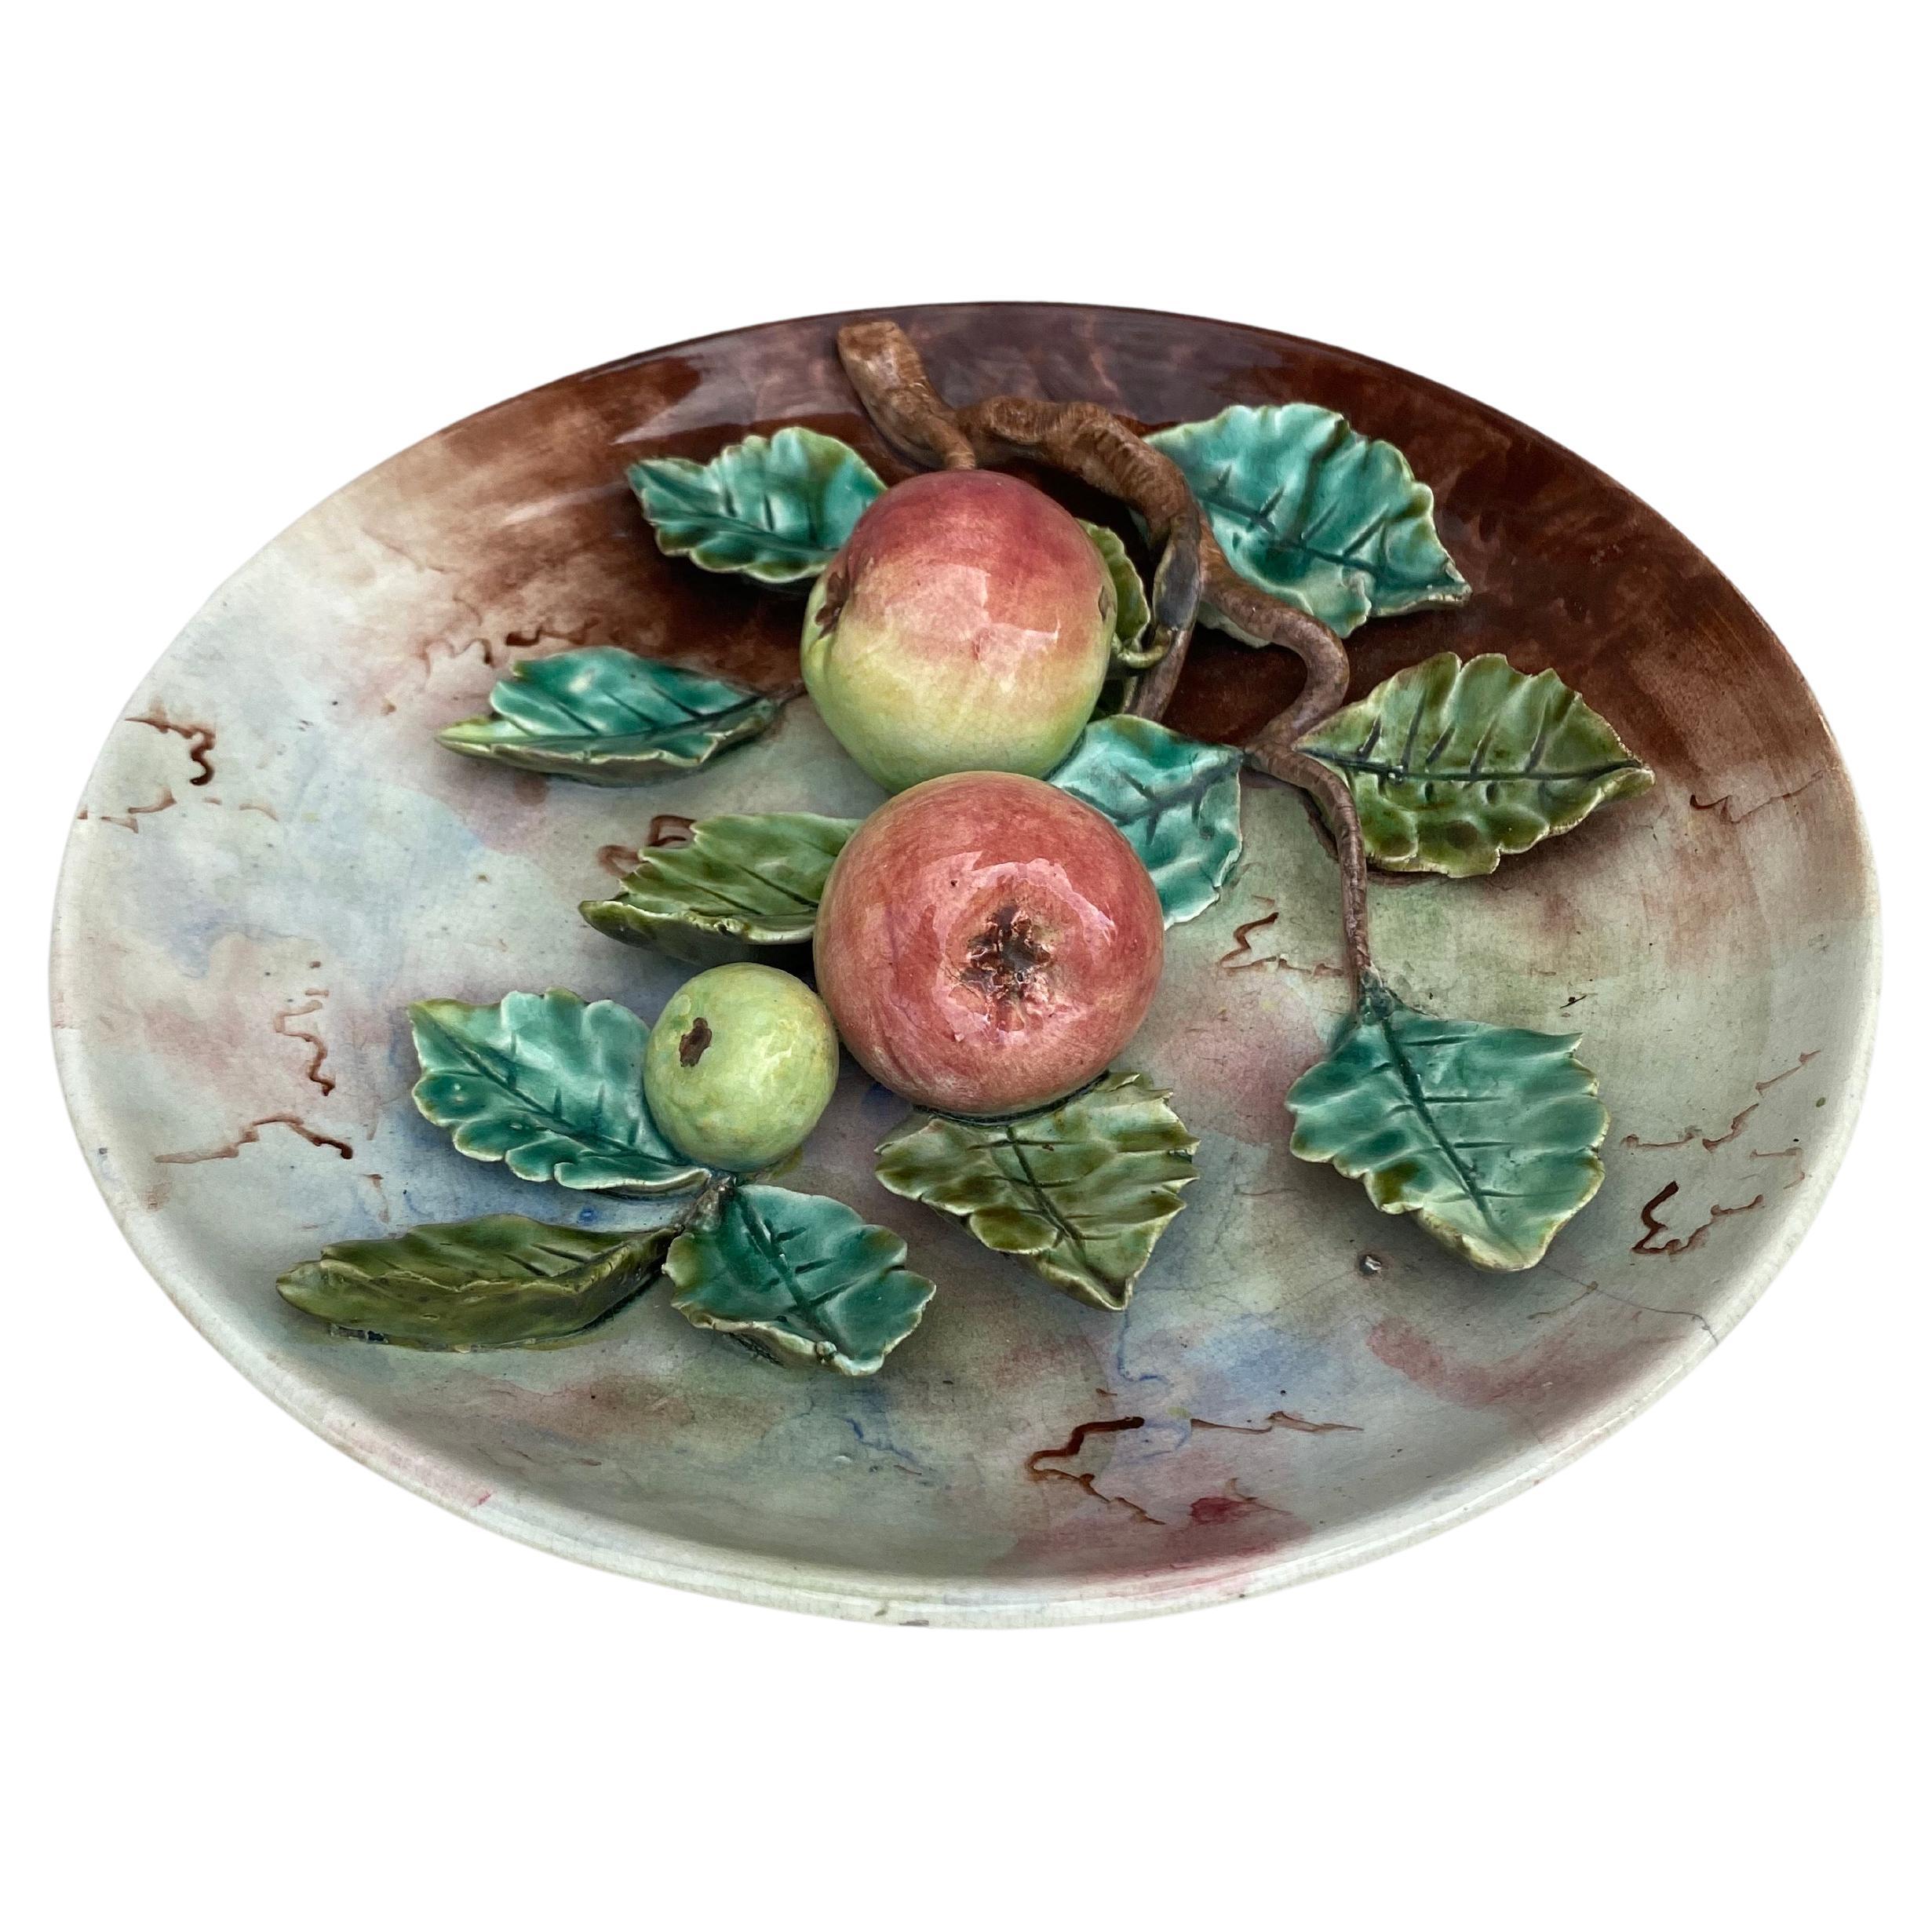 19th Century French Majolica apples fives Lille.
Measure: 10.5 inches diameter.